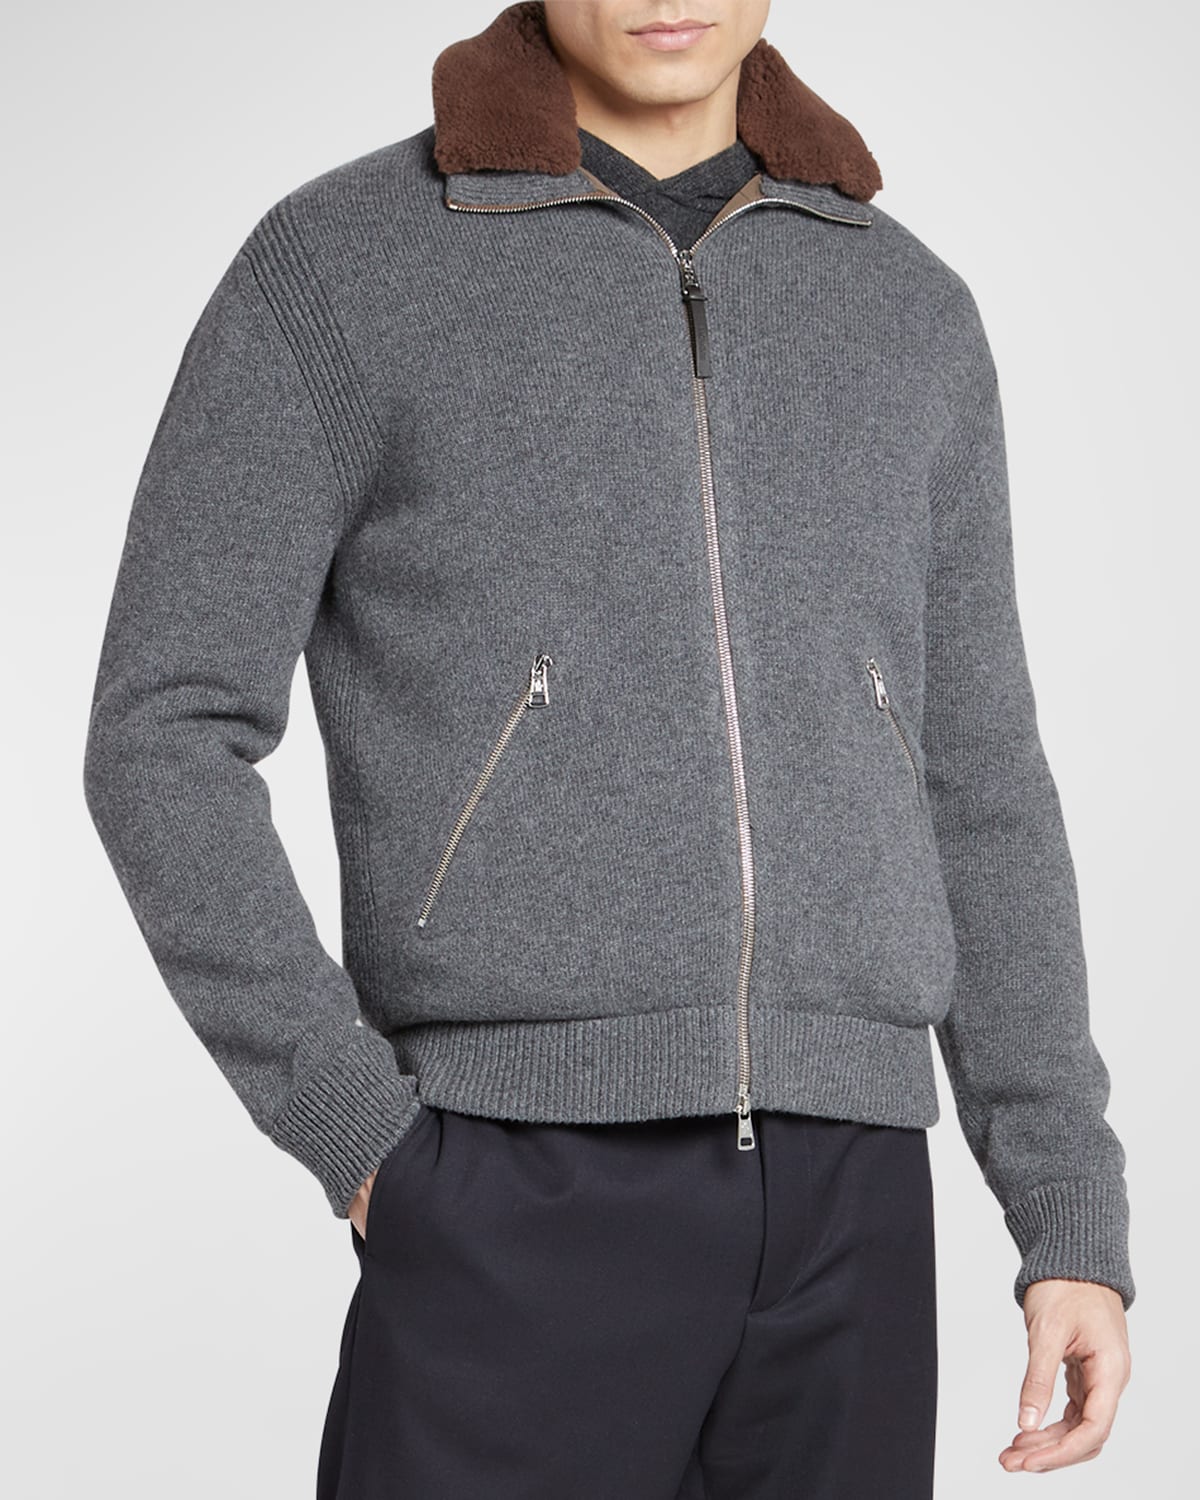 Men's Cashmere Zip-Front Cardigan With Shearling Collar